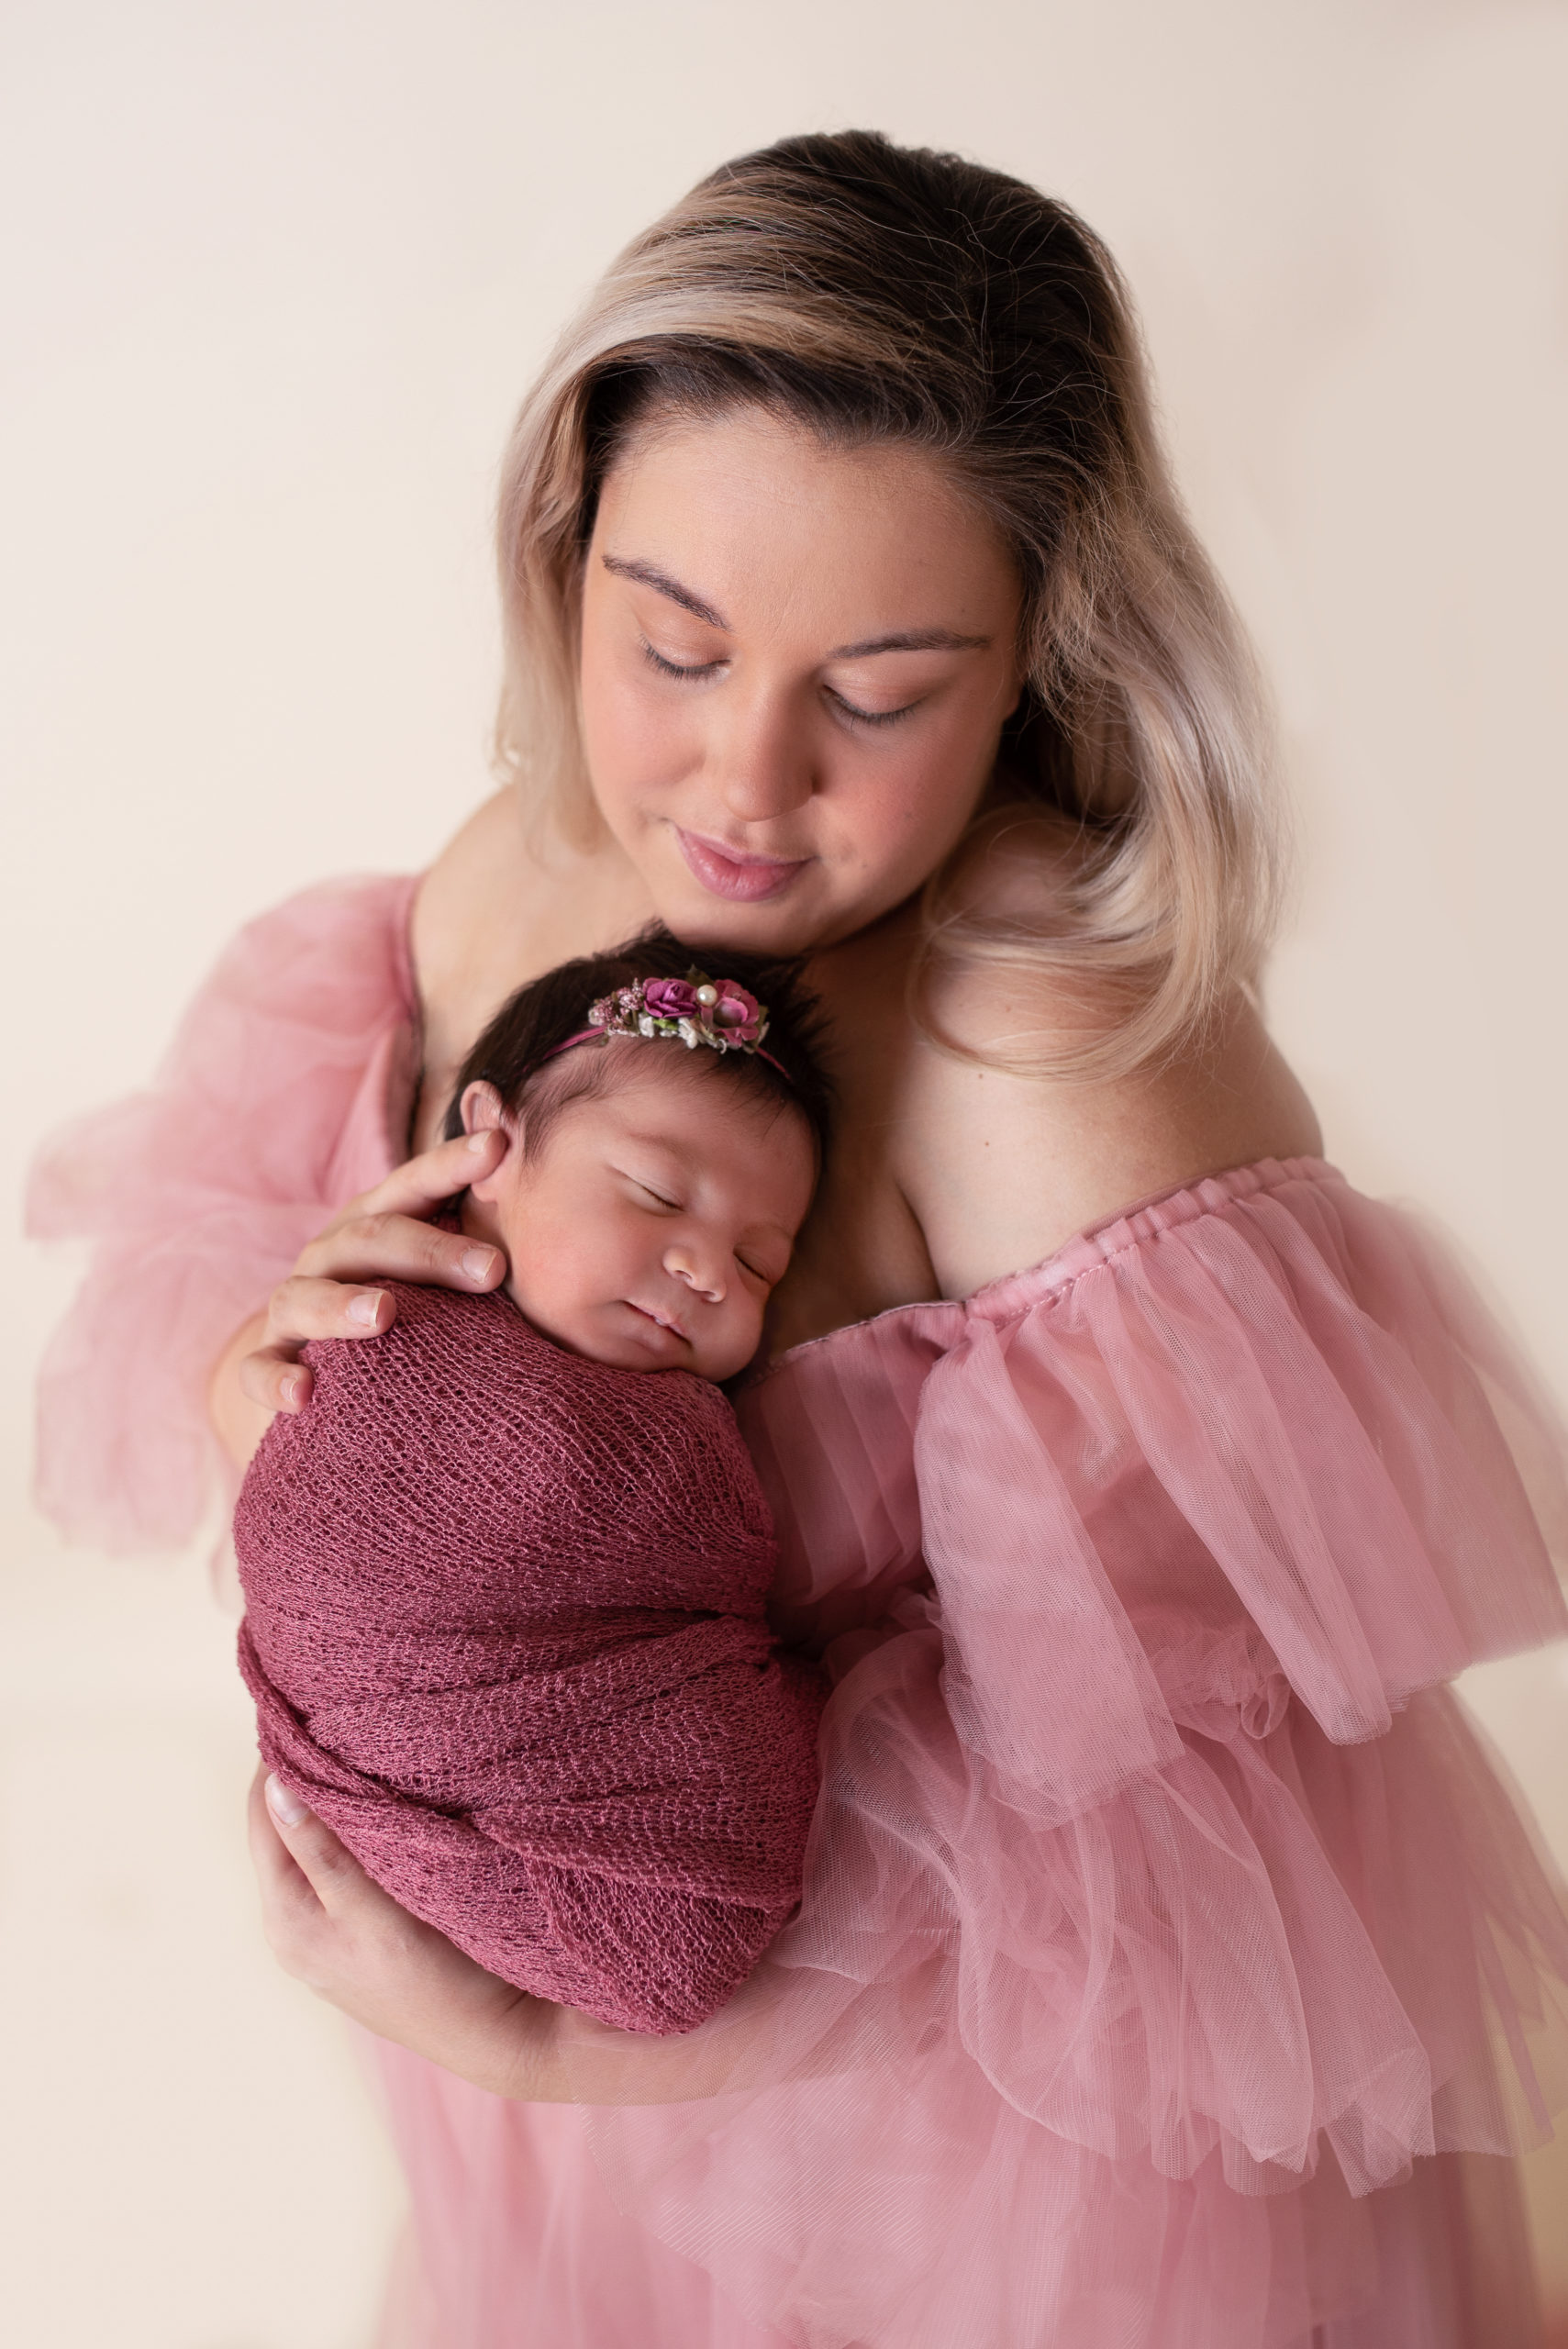 New mom holding baby girl dressed in pink Houston Birthing Centers